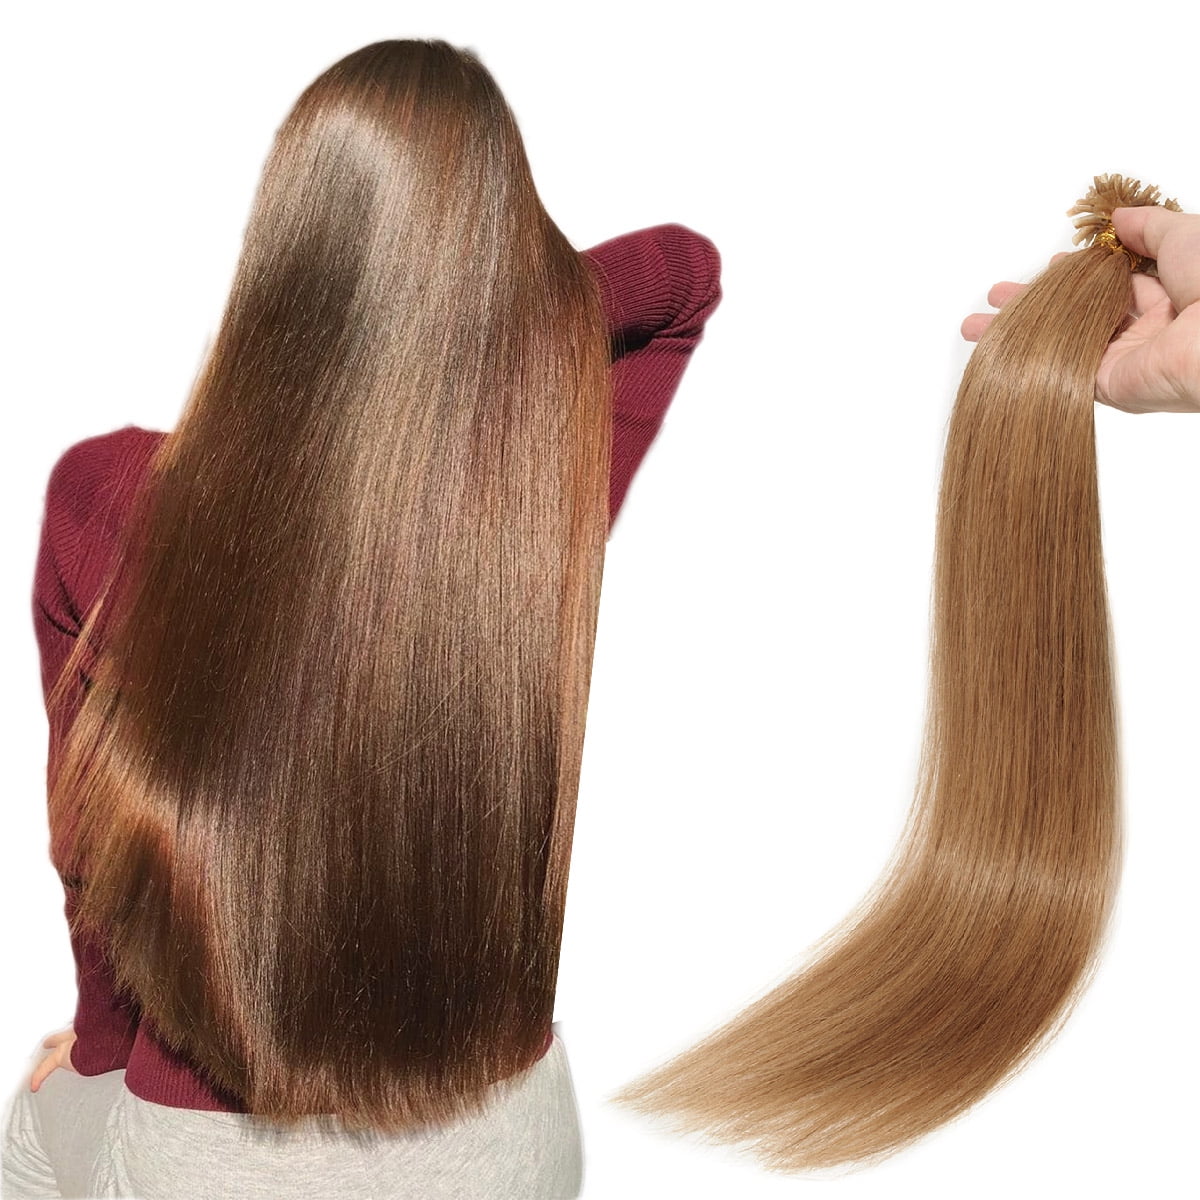 Buy our Textured Kinky Straight Hair Extension Online - Lavish Hair Line